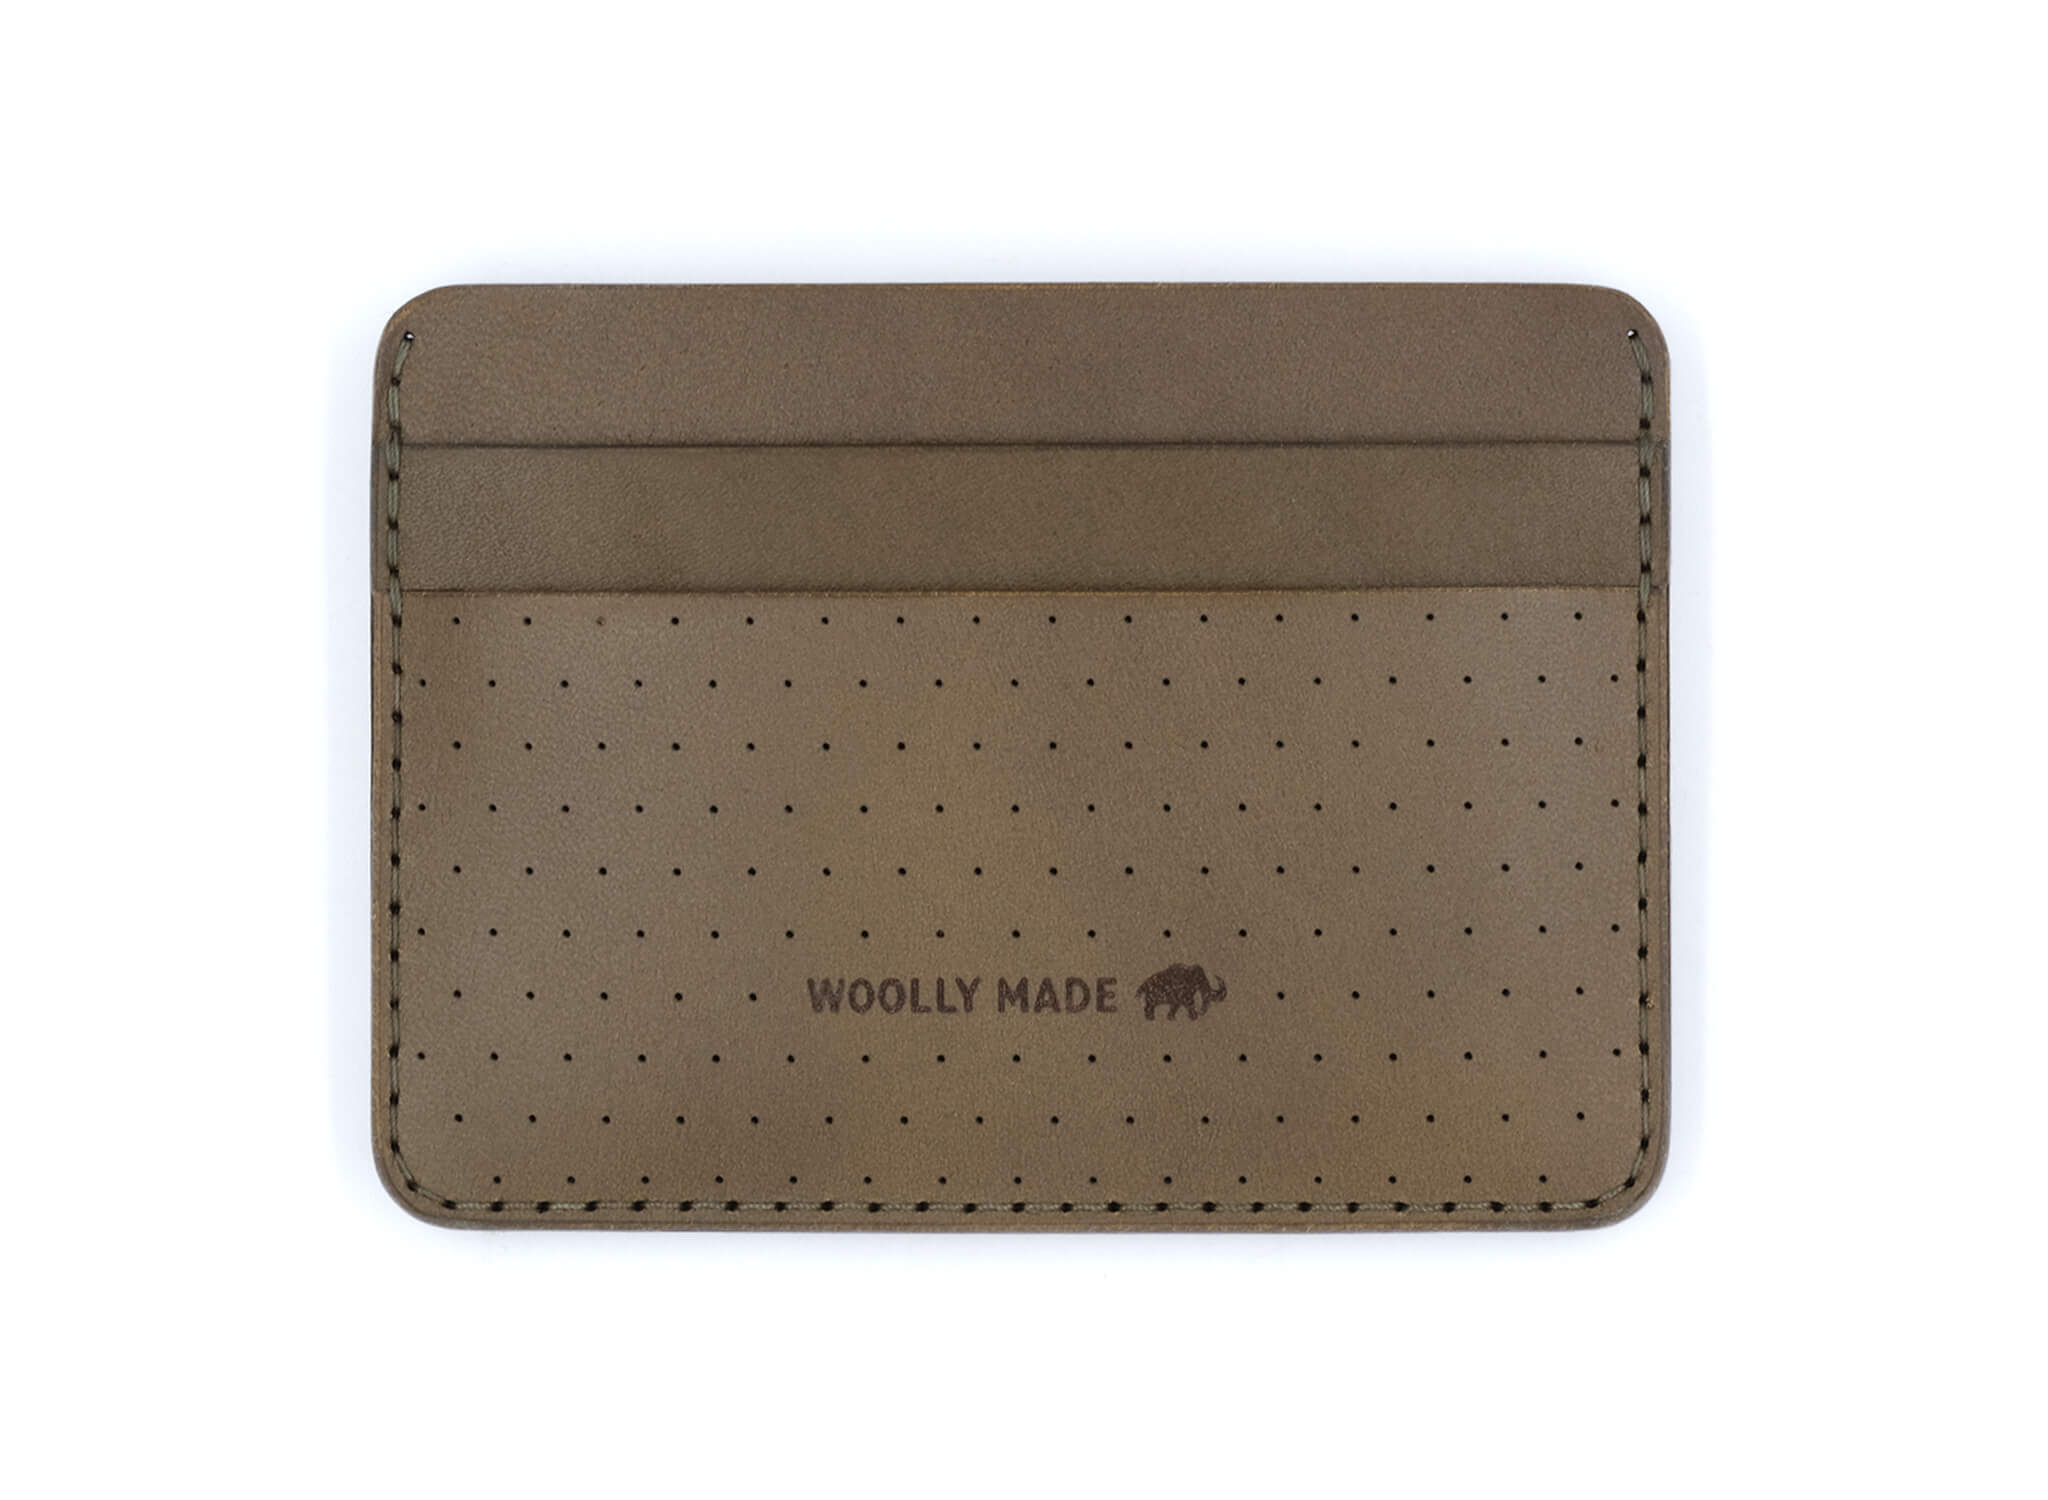 Wooly Made Money Clip Wallet – Save Khaki United